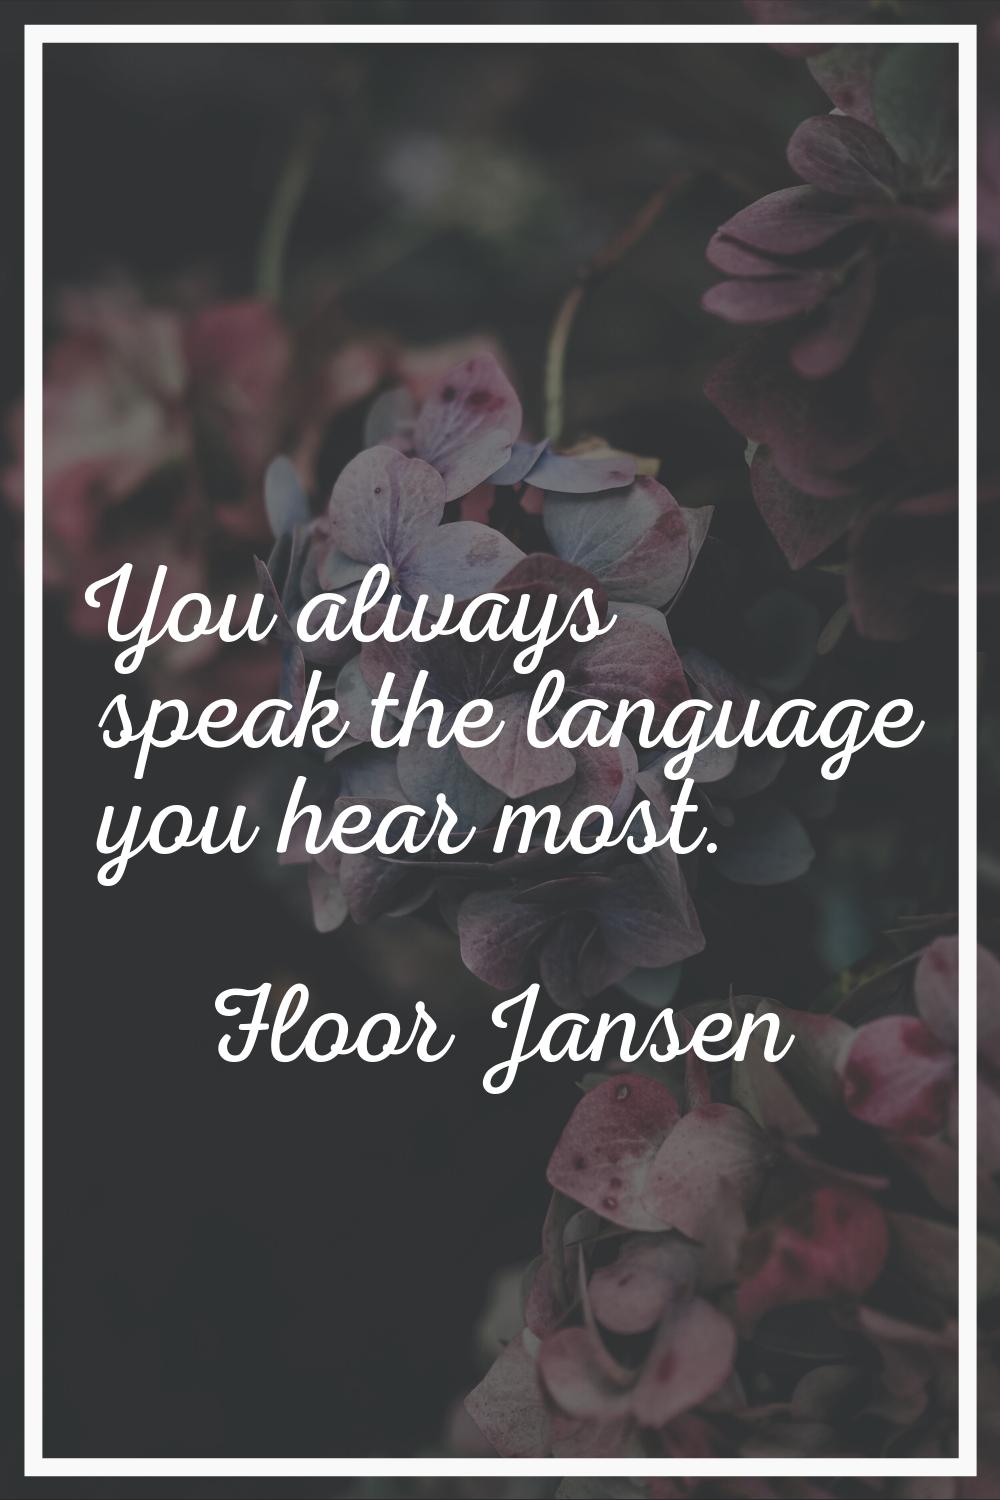 You always speak the language you hear most.